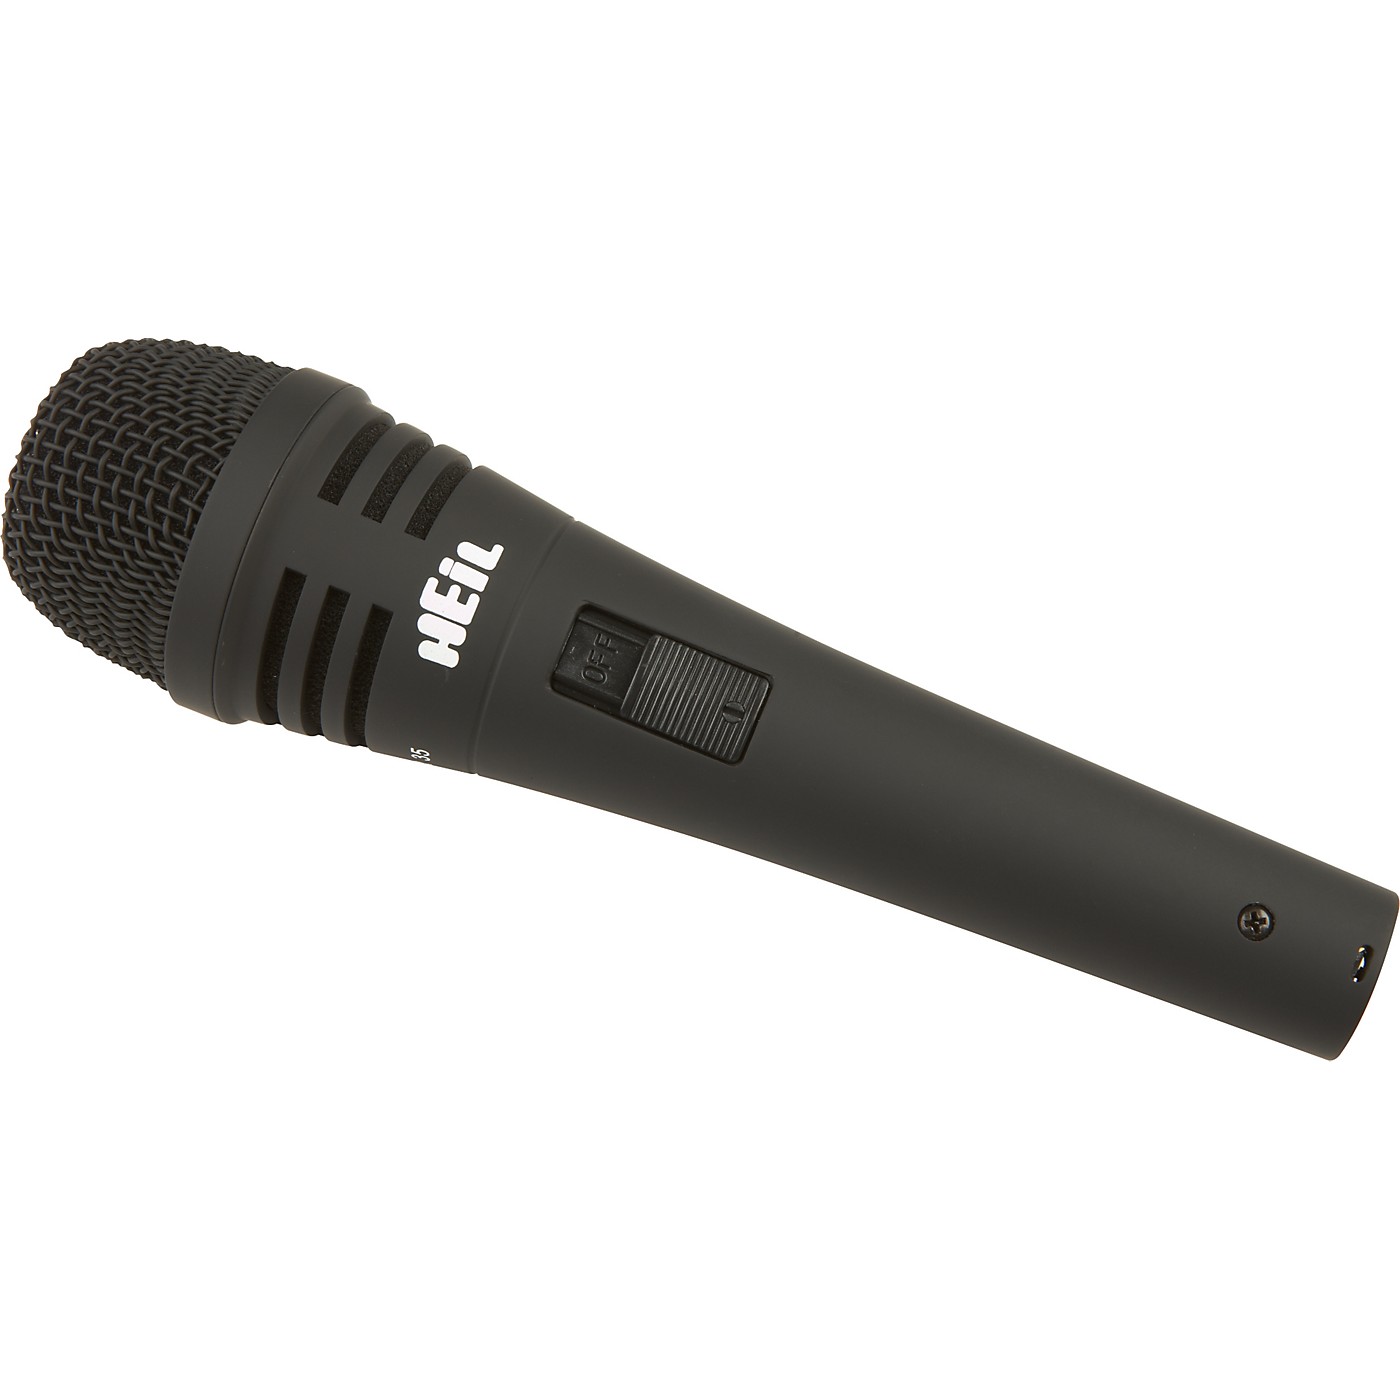 Heil Sound PR 35S Large-Diaphram Dynamic Handheld Microphone W/ On/Off Switch thumbnail